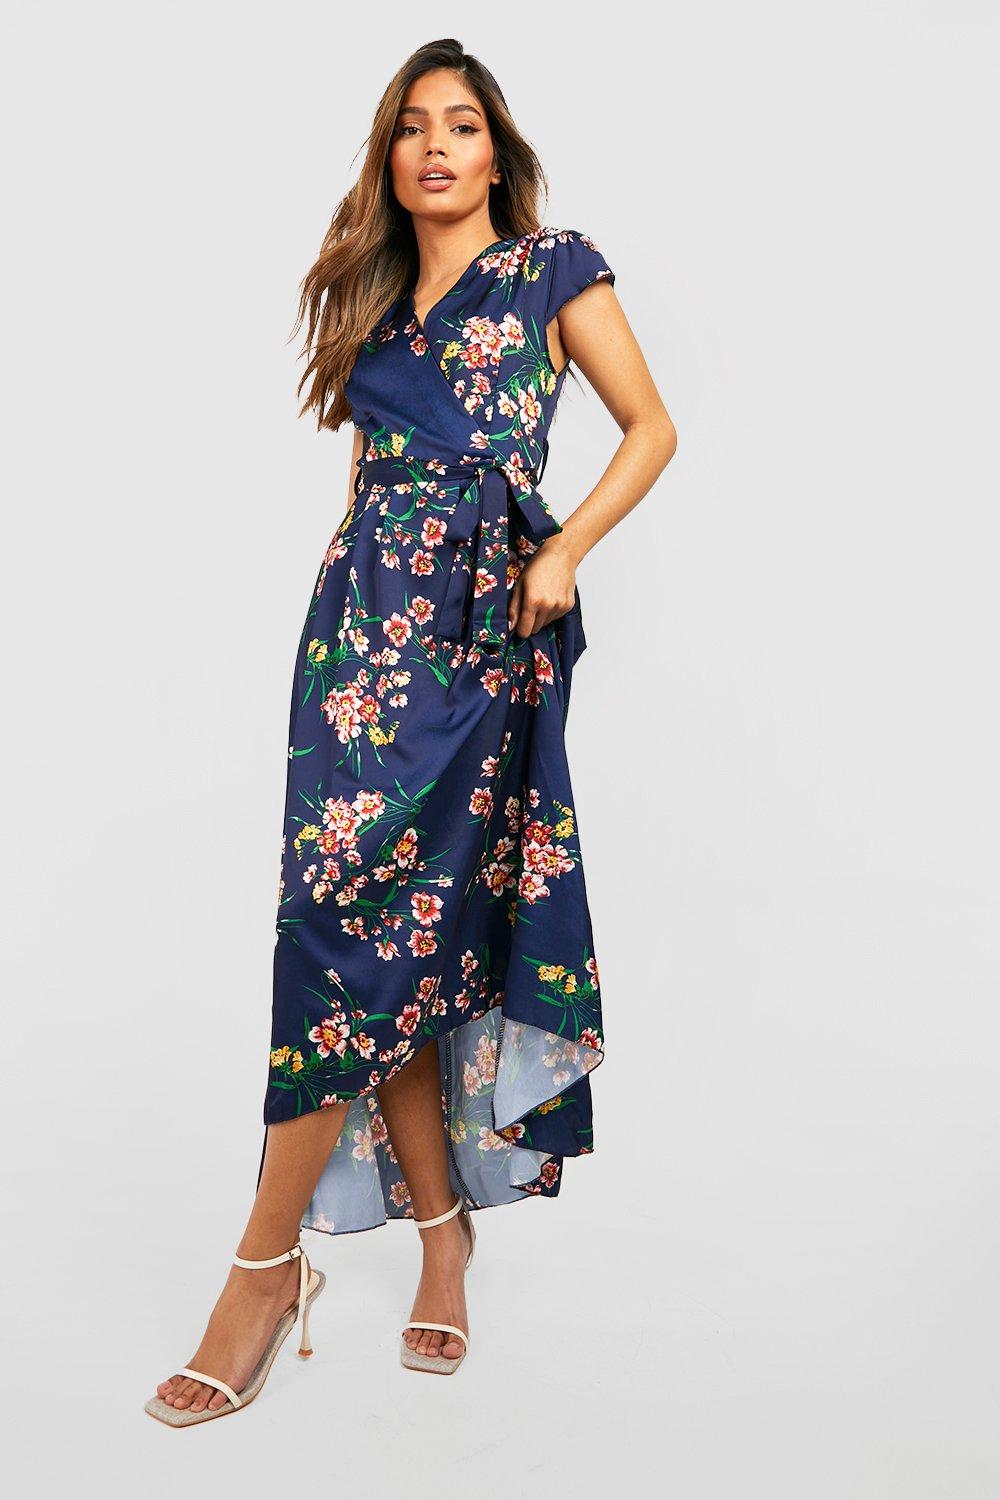 floral midi dress with sleeves